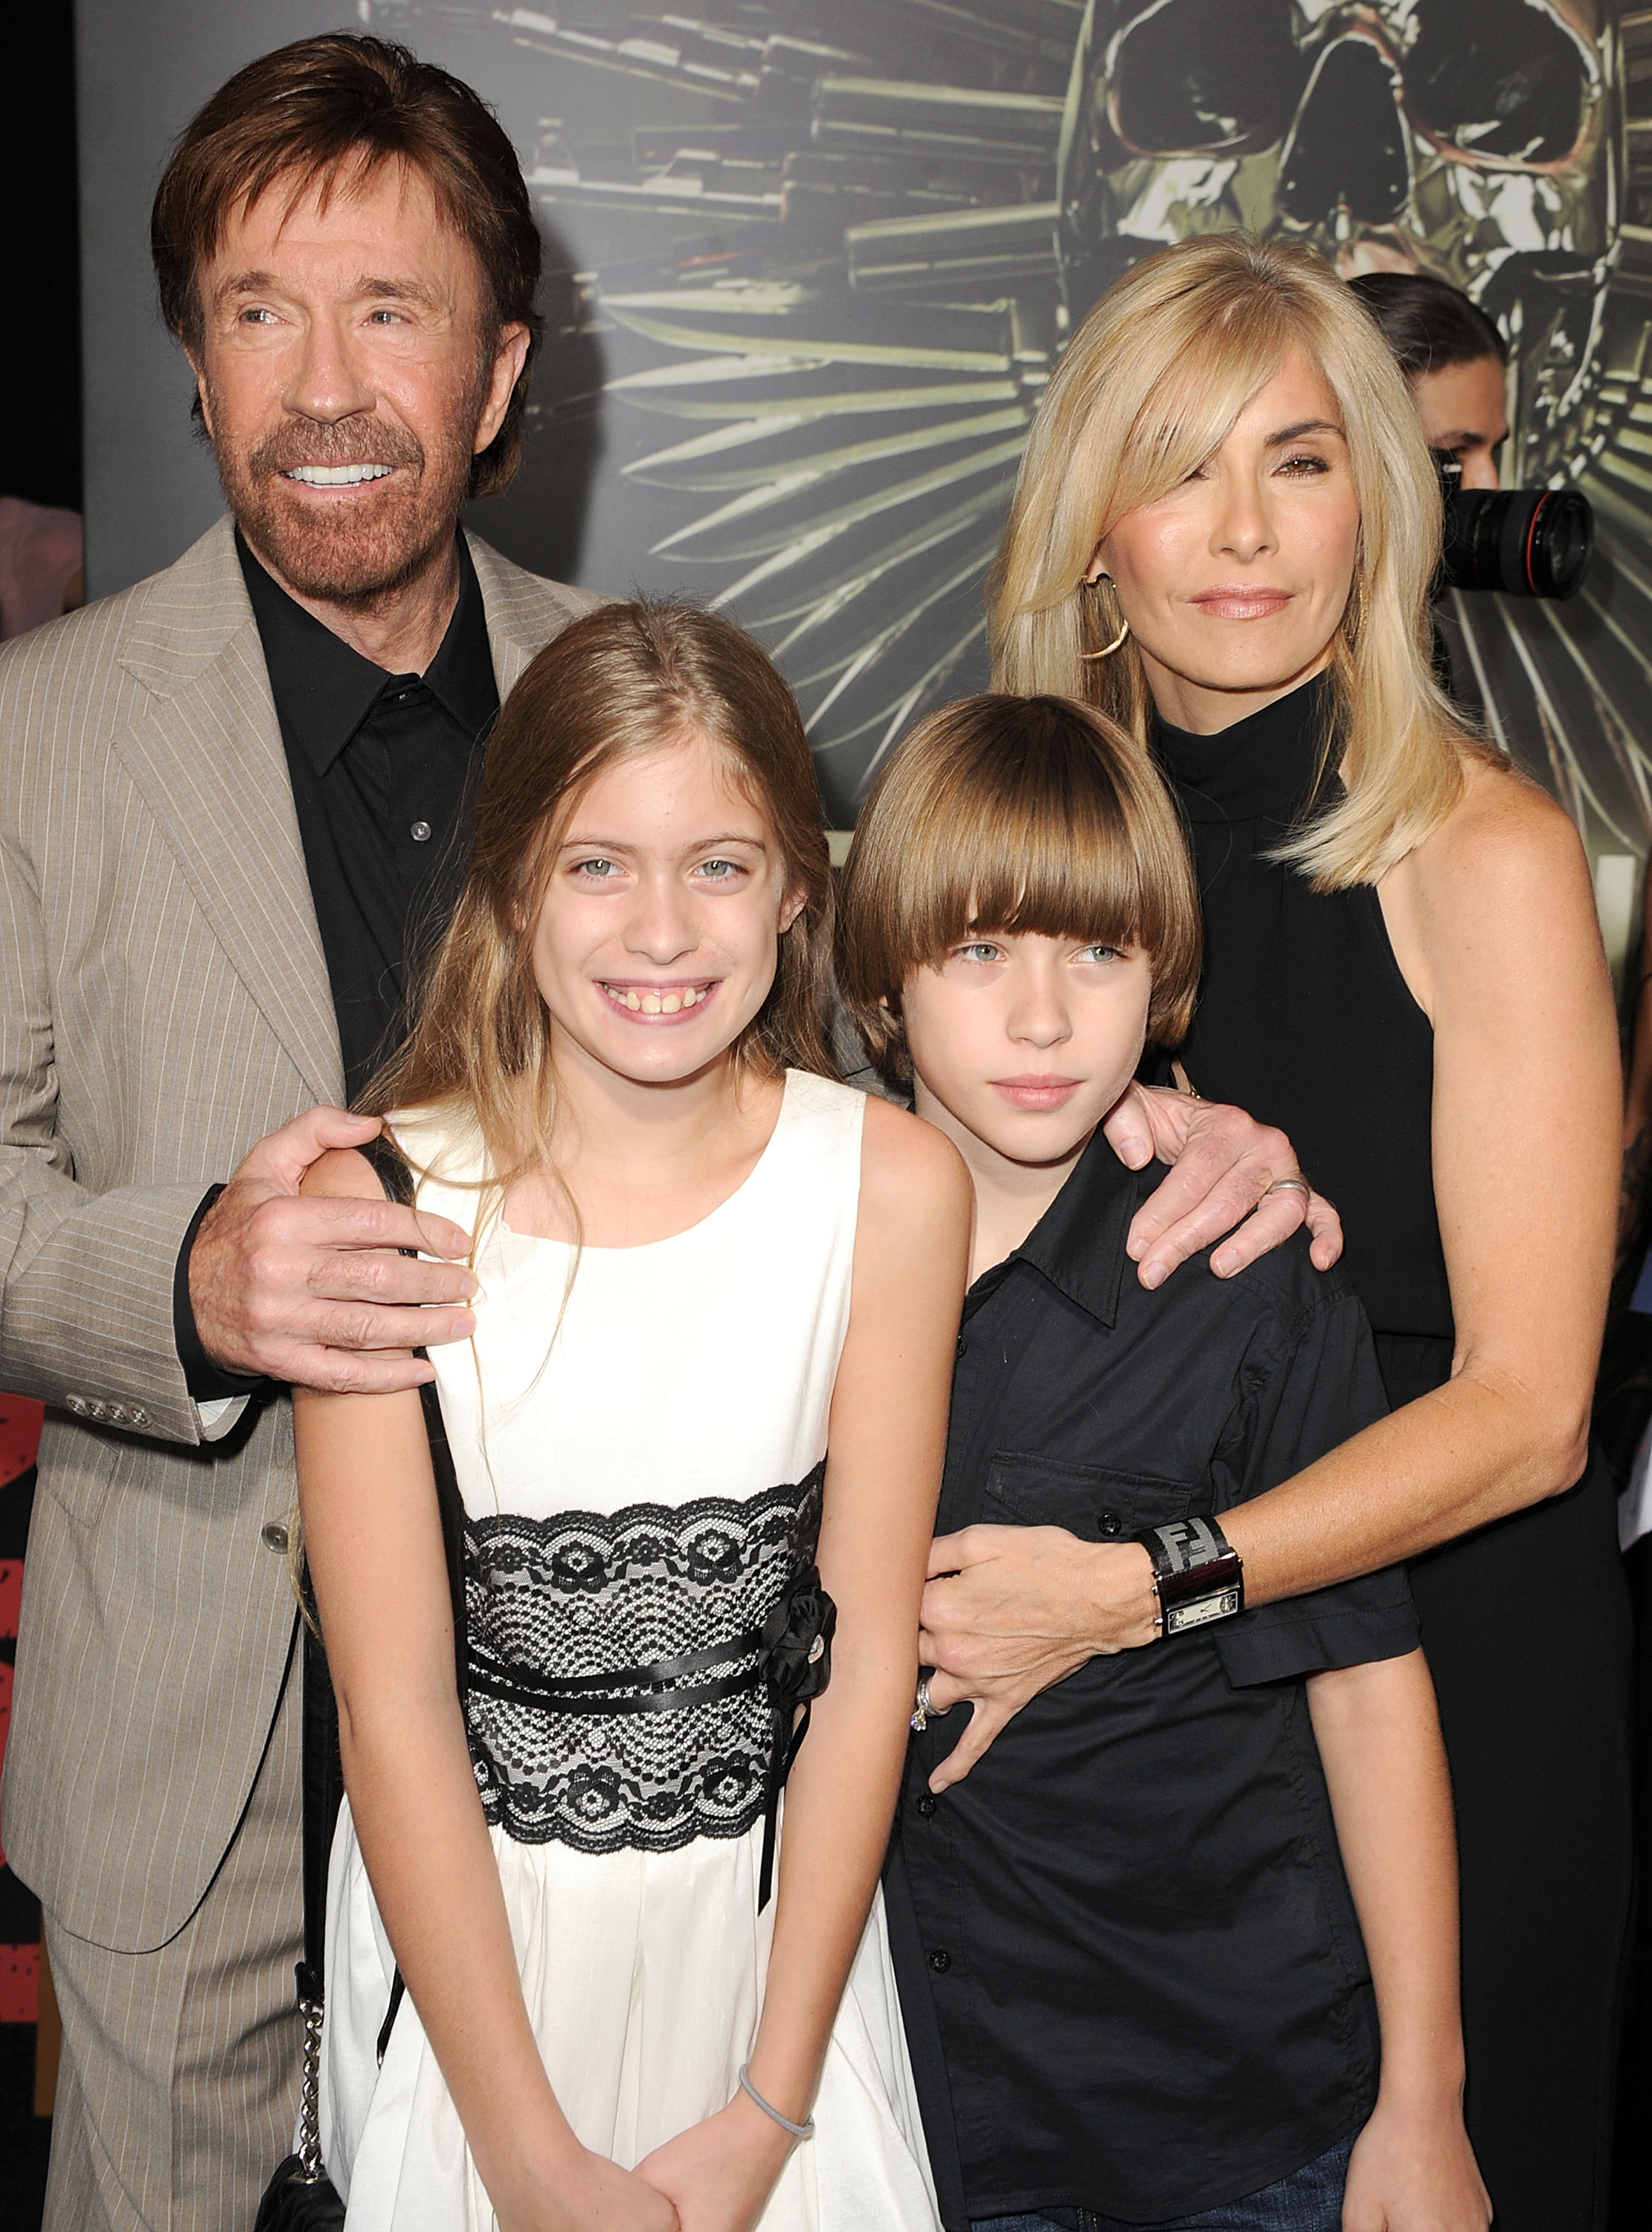 Chuck, Dakota, and Danilee Norris with Gena O'Kelley at "The Expendables 2" premiere in Los Angeles, 2012 | Source: Getty Images